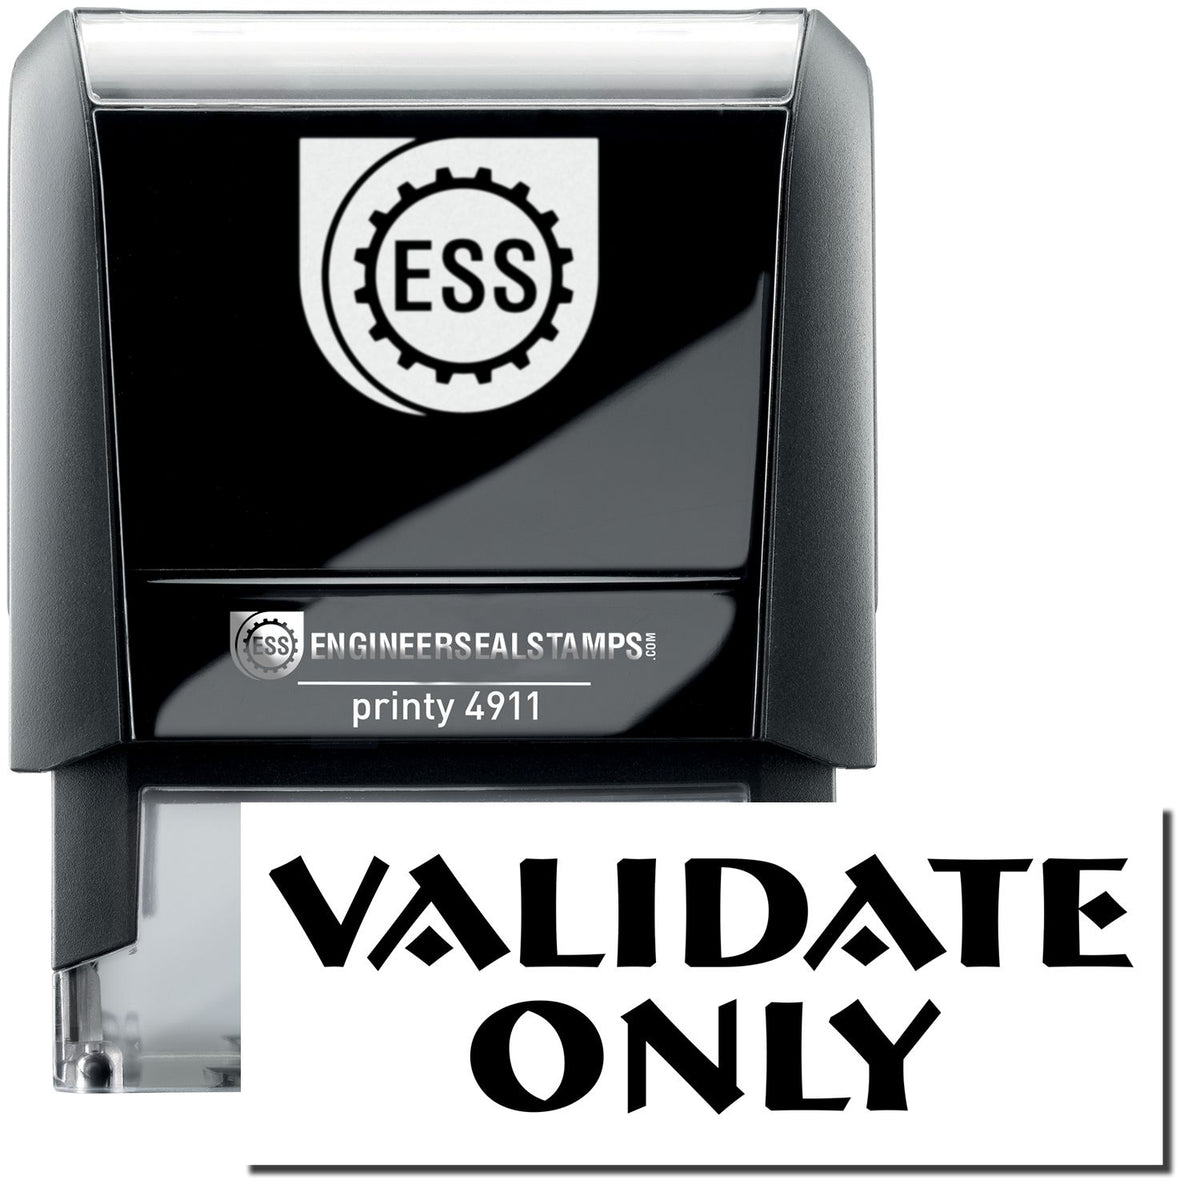 A self-inking stamp with a stamped image showing how the text &quot;VALIDATE ONLY&quot; is displayed after stamping.